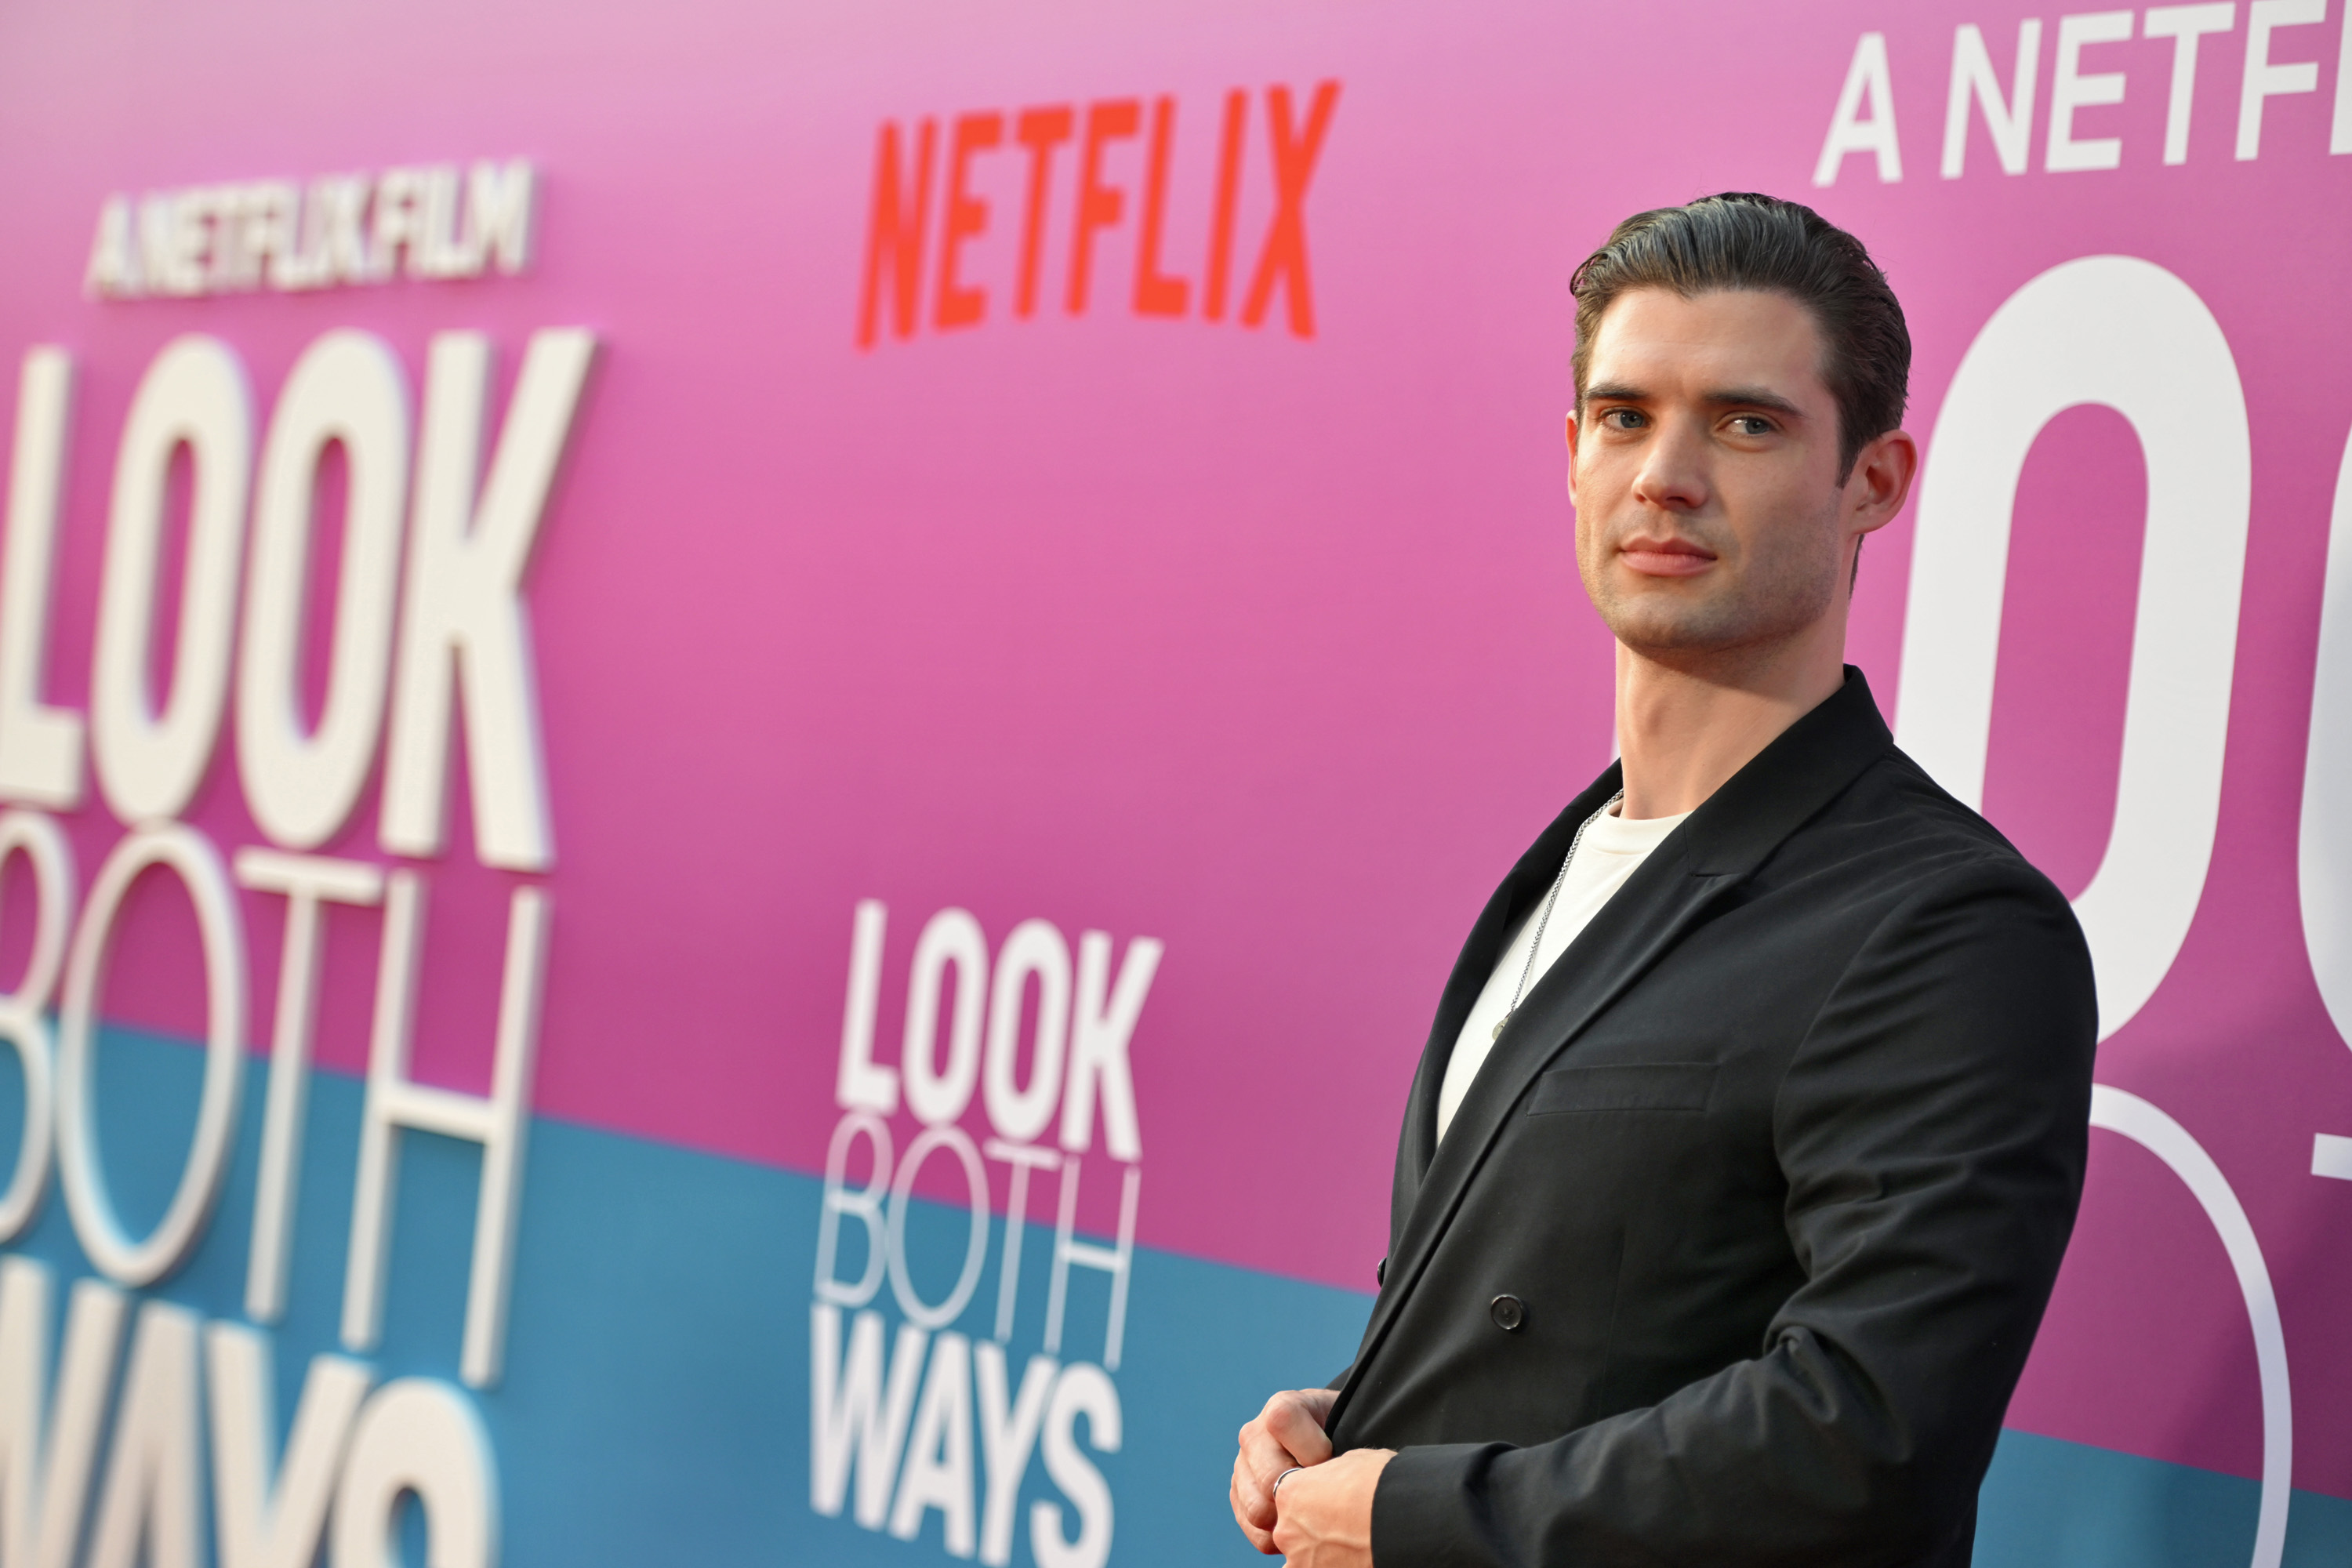 David Corenswet at the screening of "Look Both Ways" in Hollywood, California on August 16, 2022 | Source: Getty Images